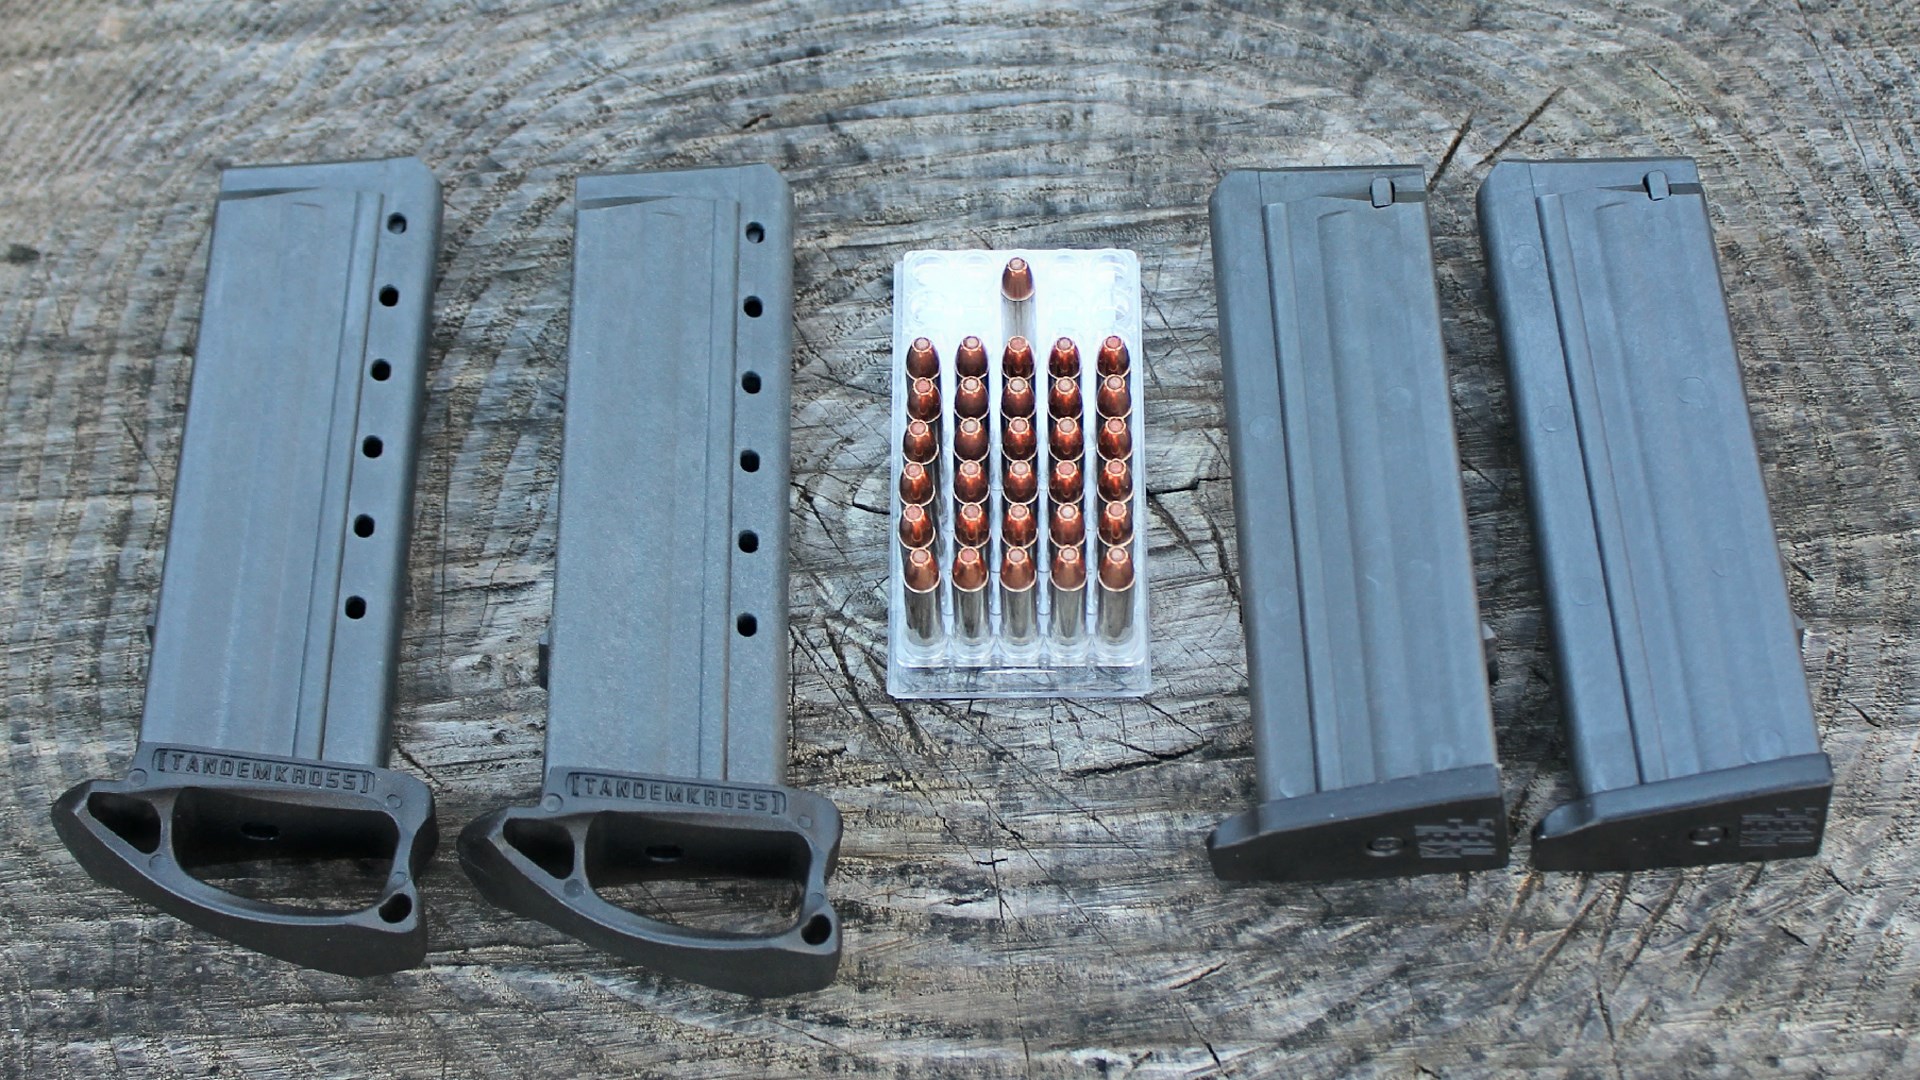 keltec pmr30 magazines with tandemkross baseplate shown with ammunition block on wood